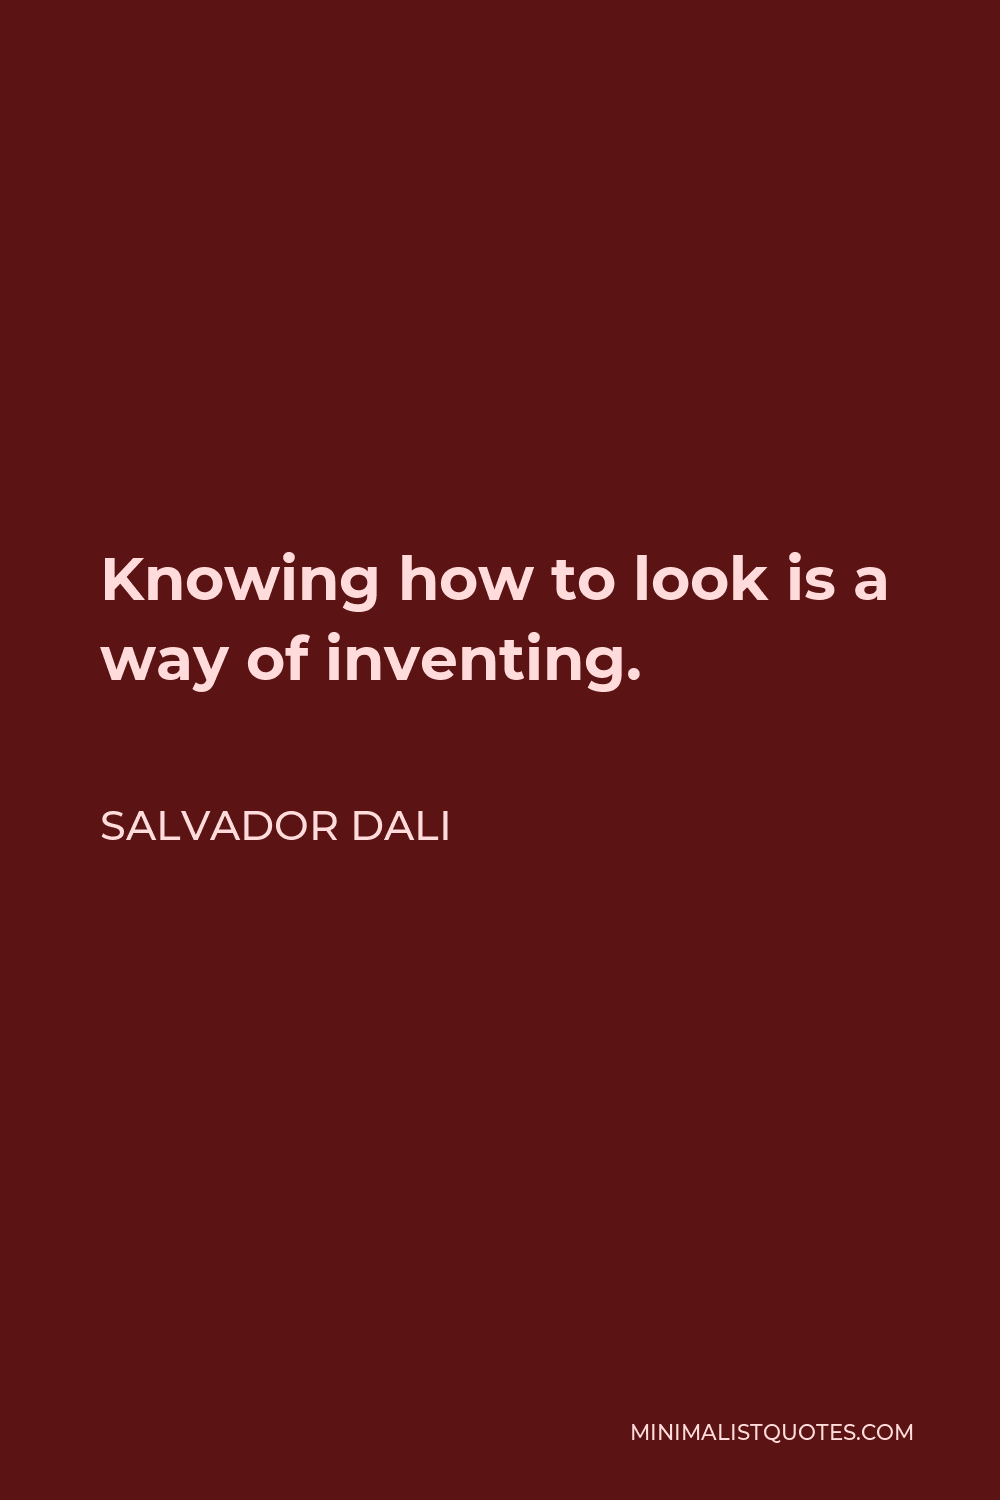 Salvador Dali Quote - Knowing how to look is a way of inventing.